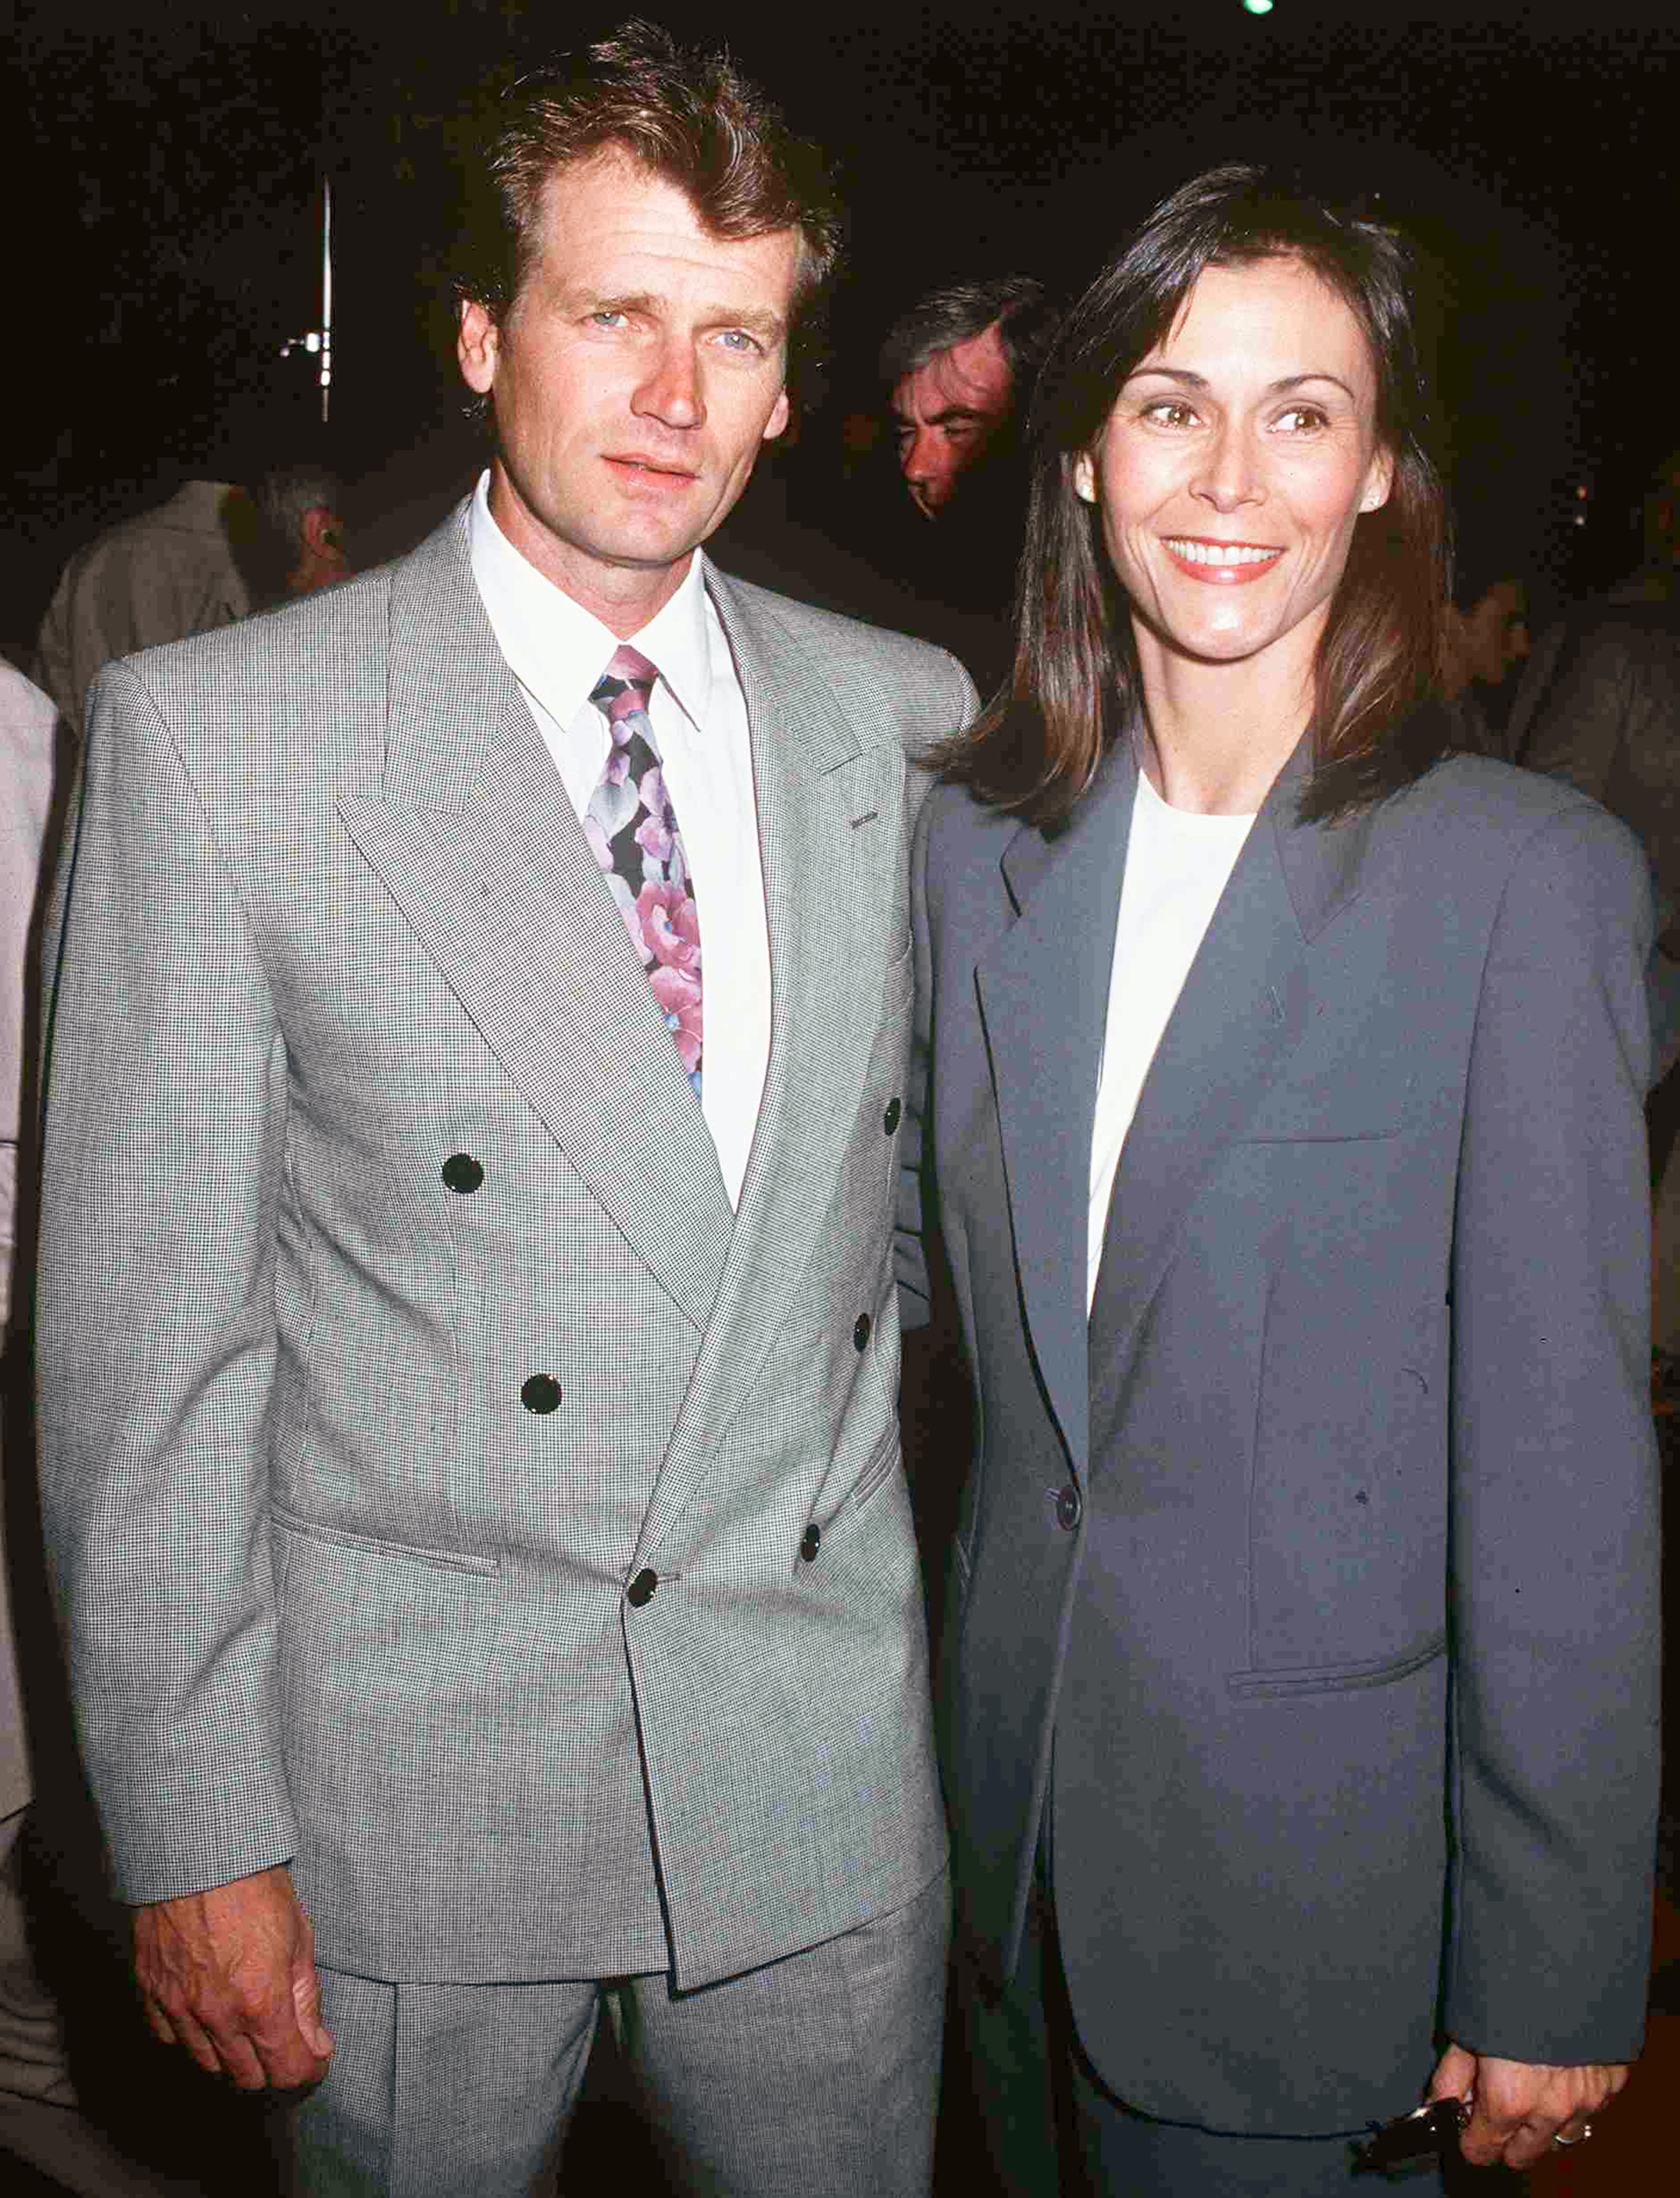 Kate Jackson posing with her third husband Tom Hart in 1992. / Source: Getty Images